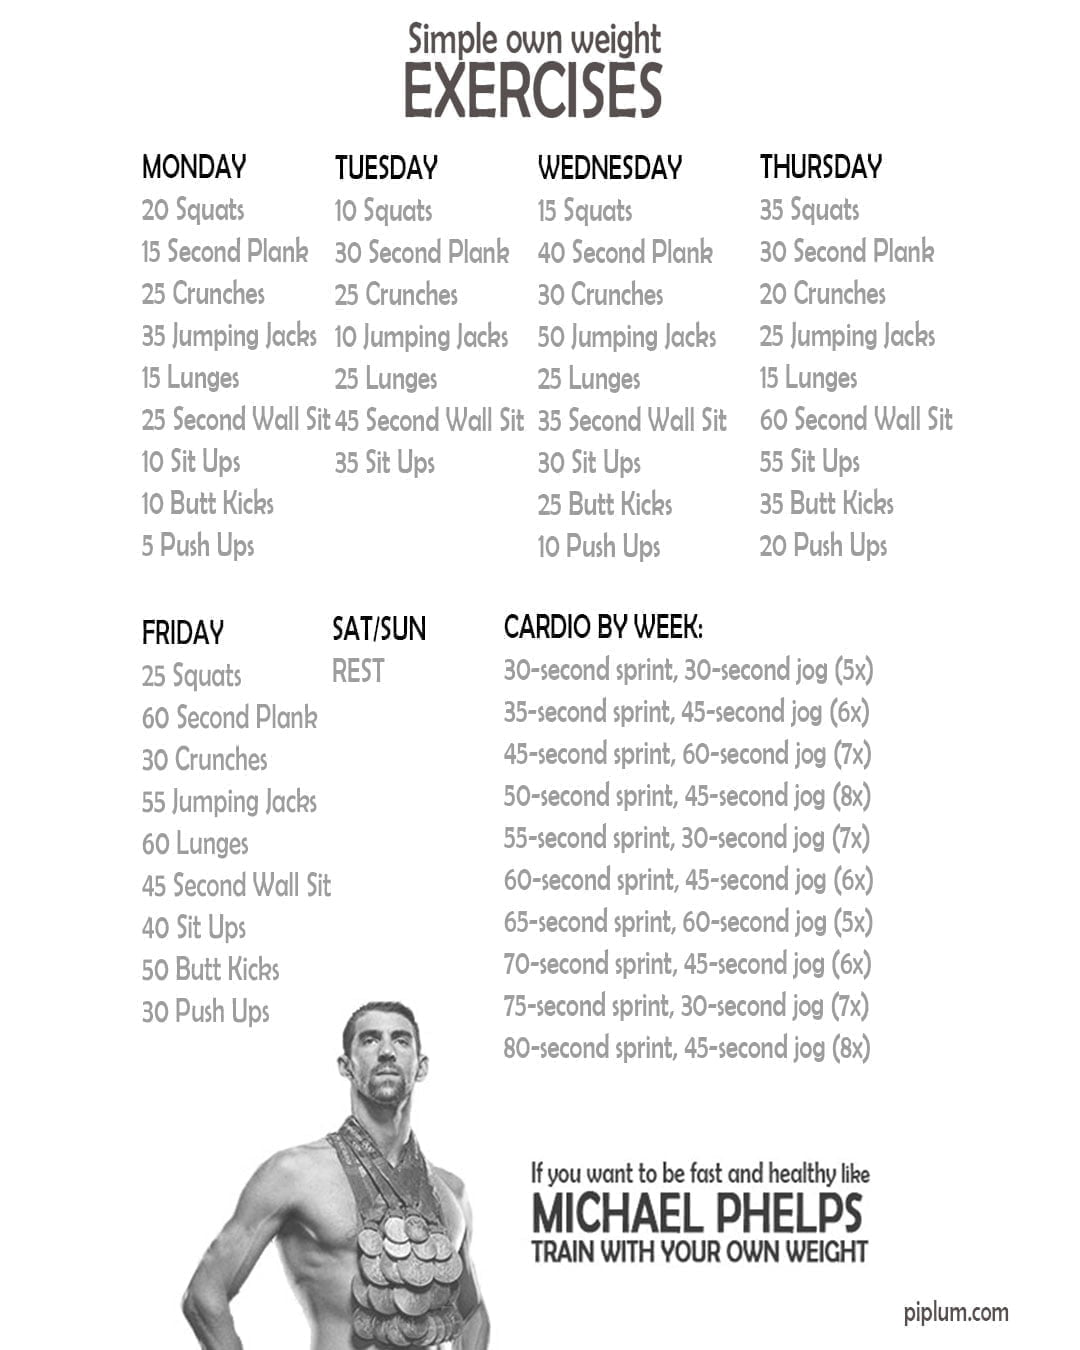 Simple-own-weight-exercises-Poster-with-Michael-Phelps-own-body-weight